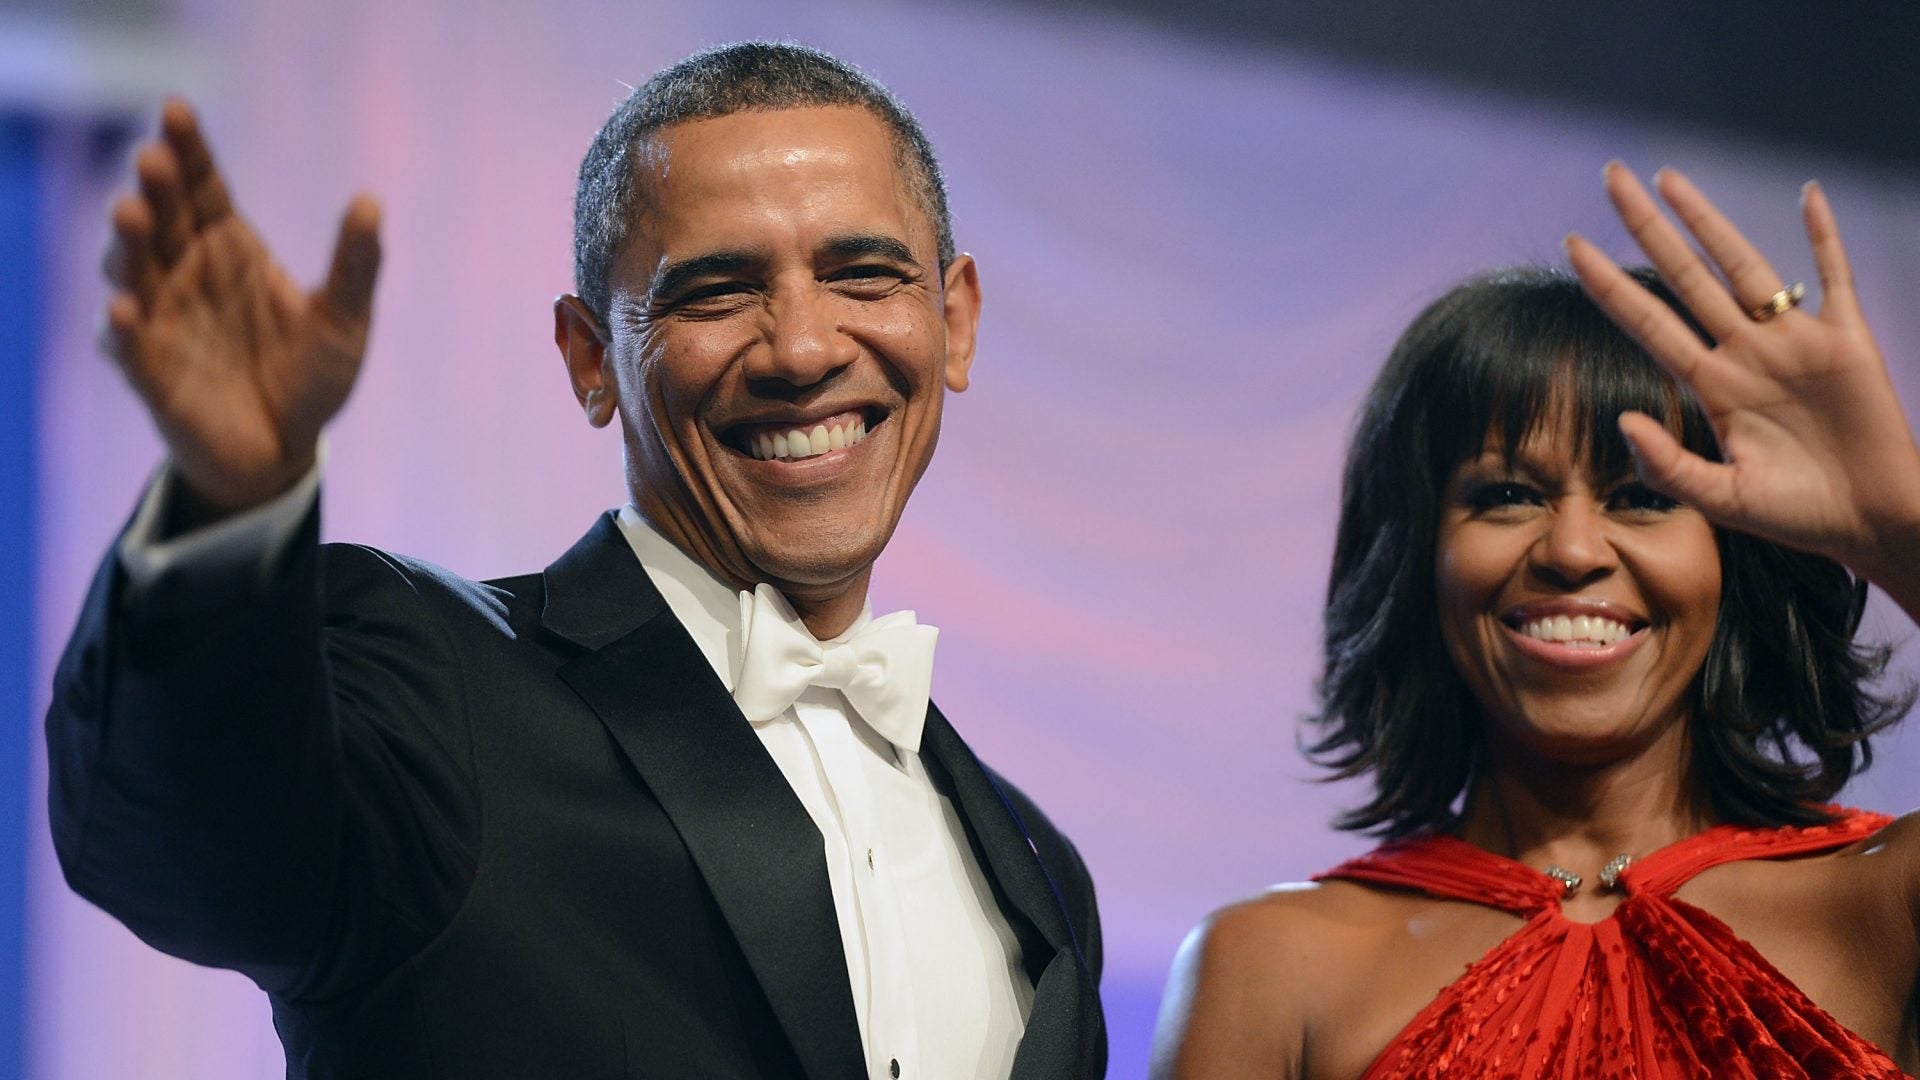 Barack Obama's New Book Reveals How Presidency Affected His Marriage